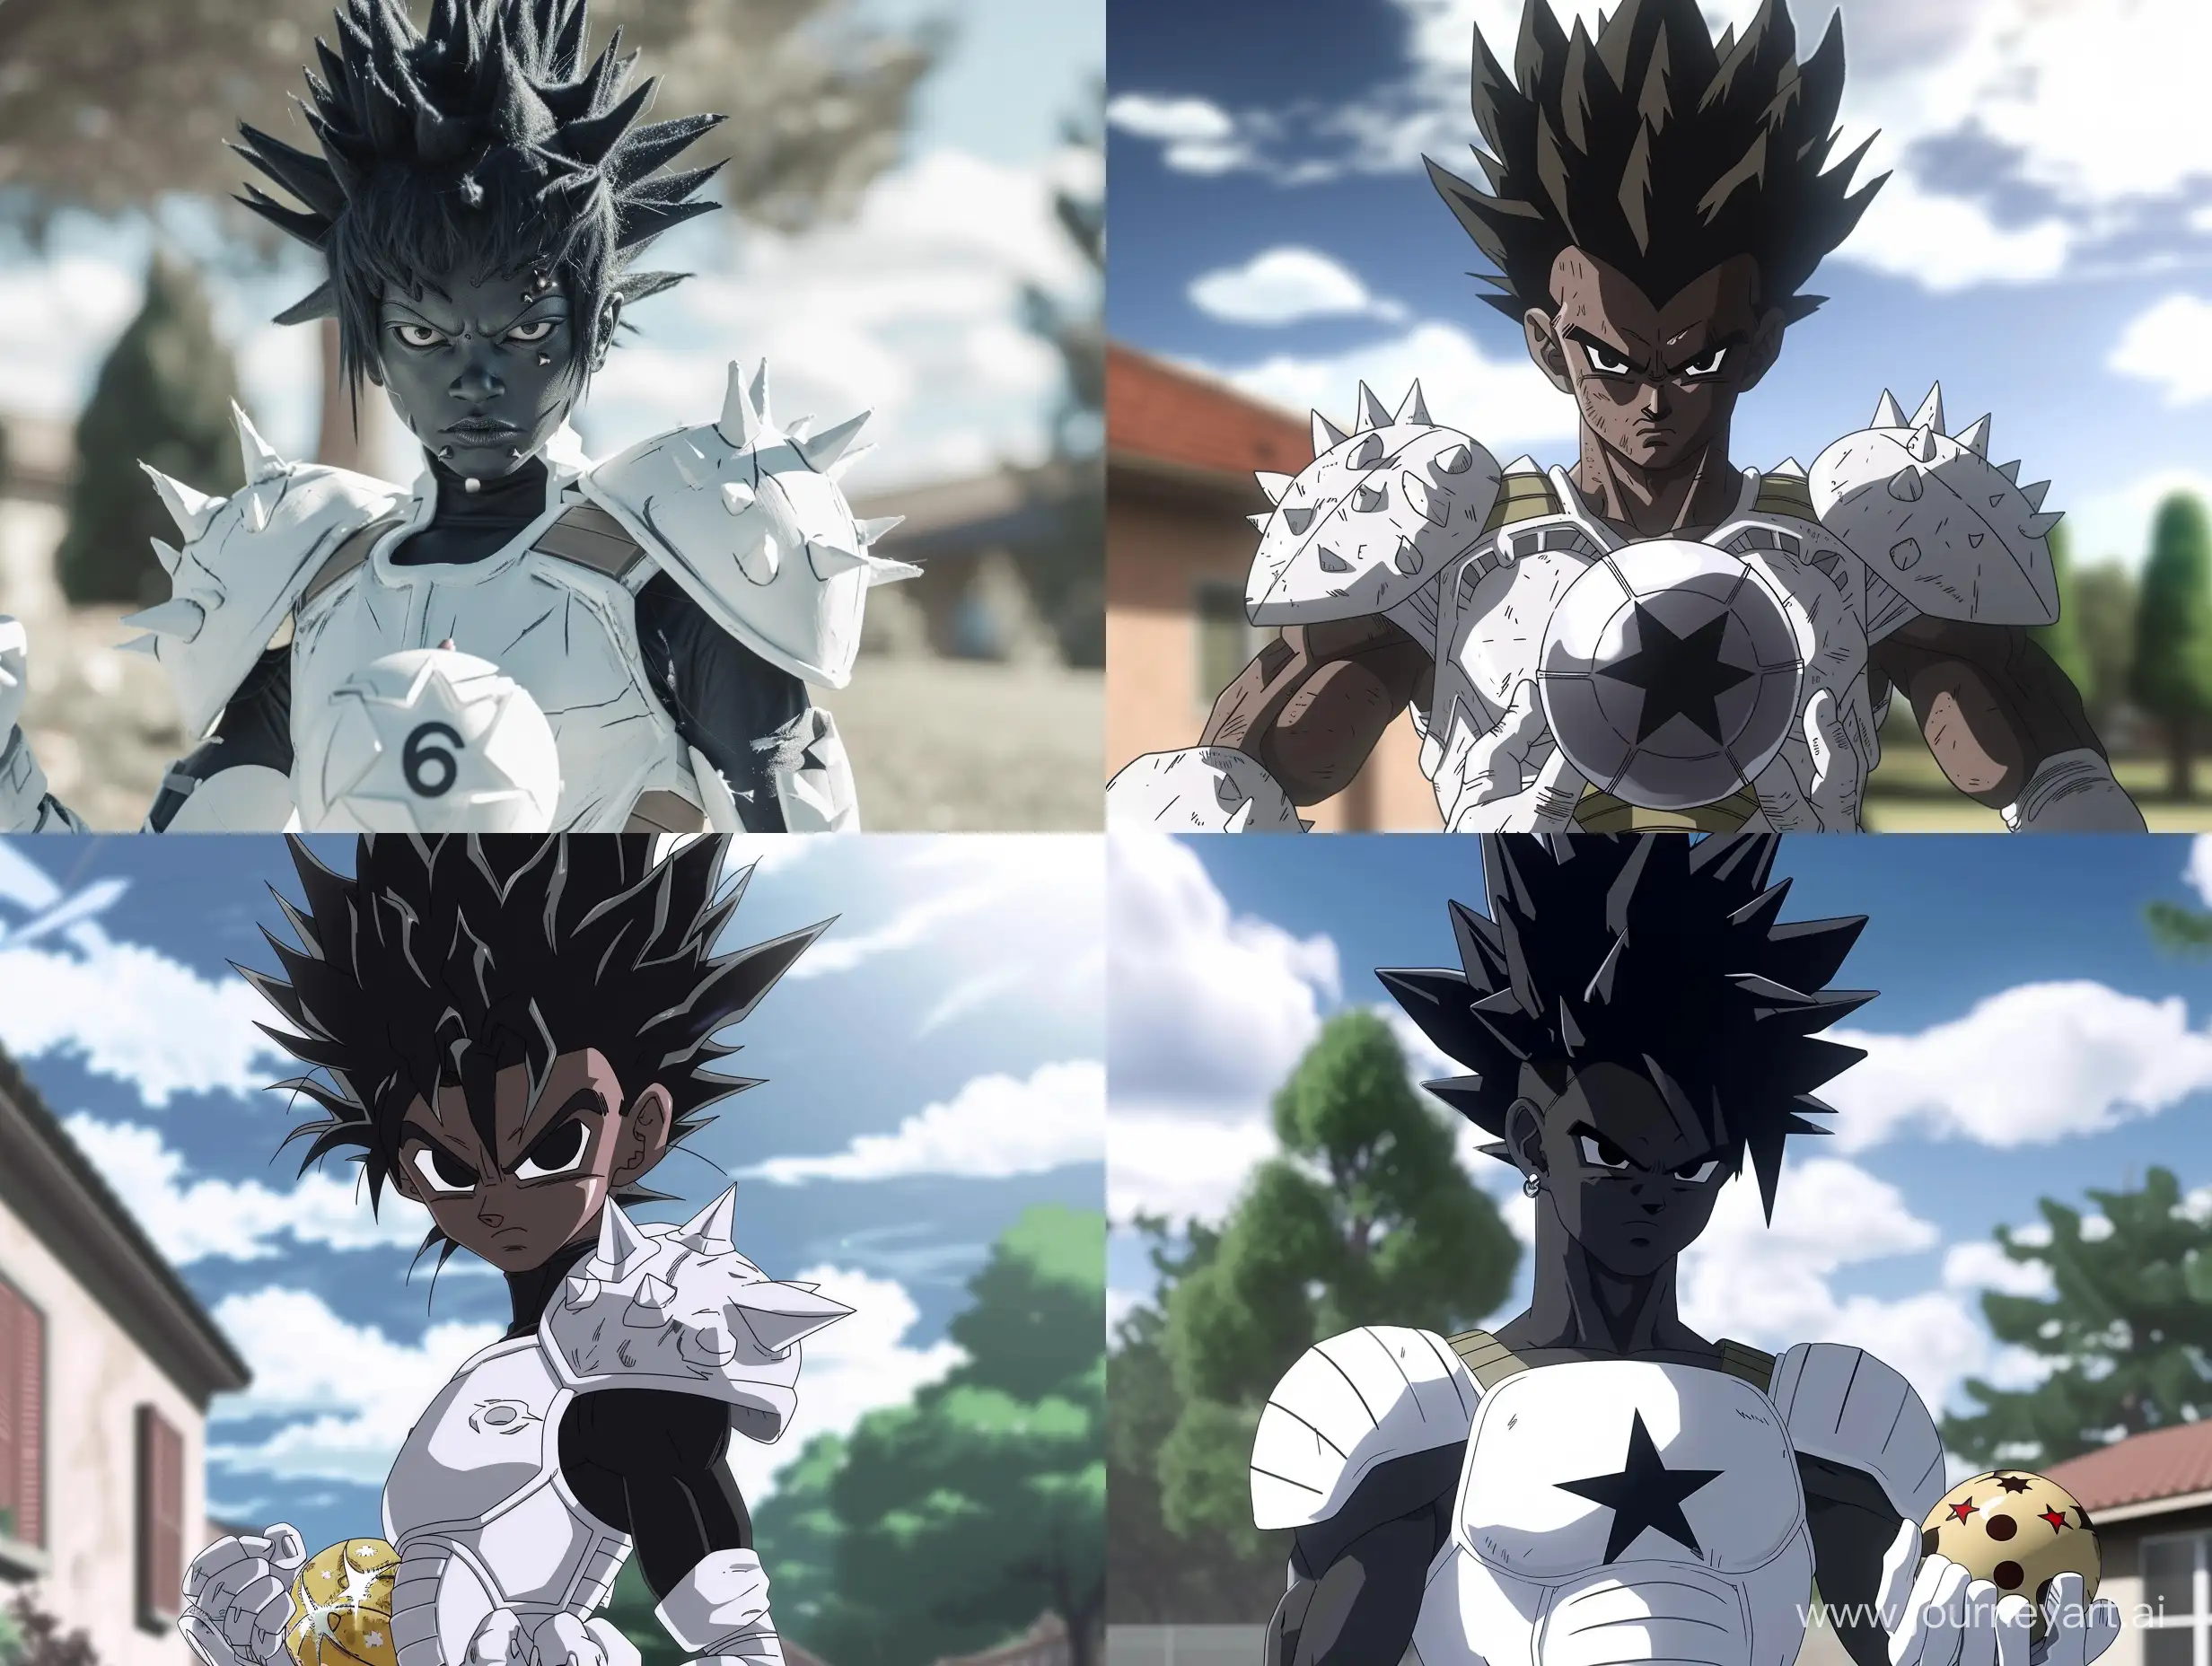 A black anime character in the style of dragon ball z, akira toriyama, wearing white armor, spikey black hair, black eyes, outside, full view, holding a 6 star dragonball